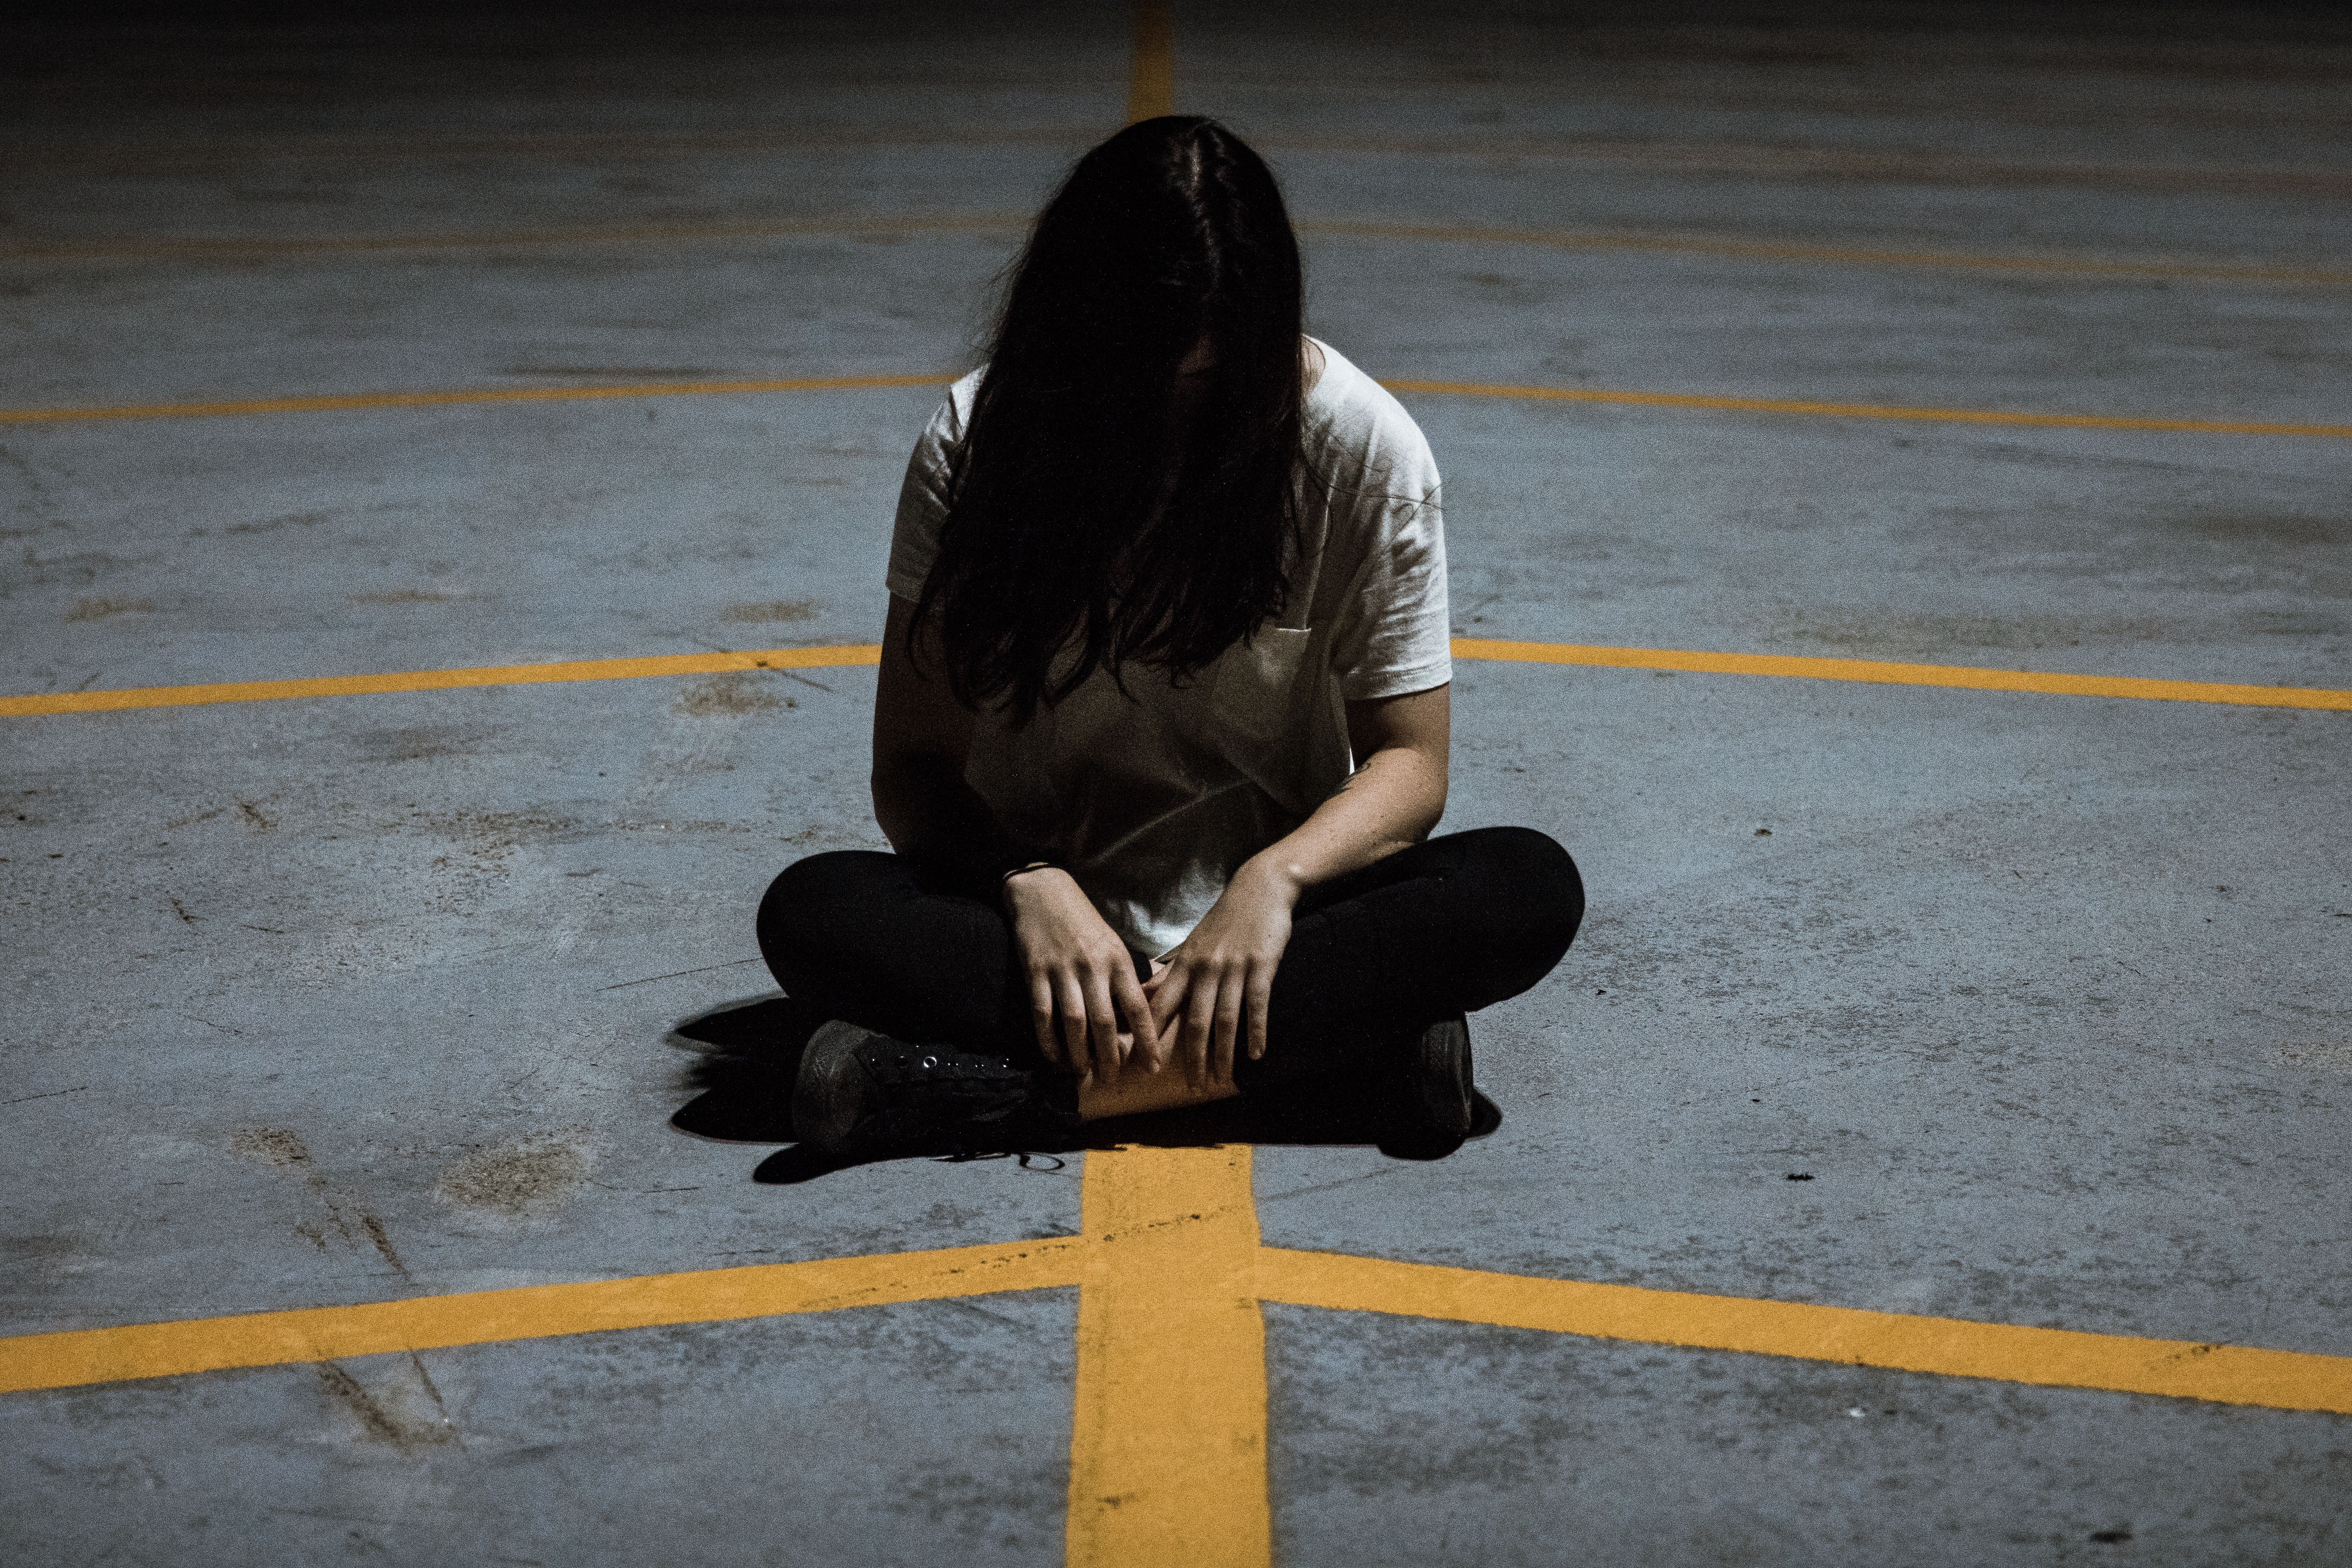 Self-Harm and Feeling Lonely: A Cycle of Self-Injury